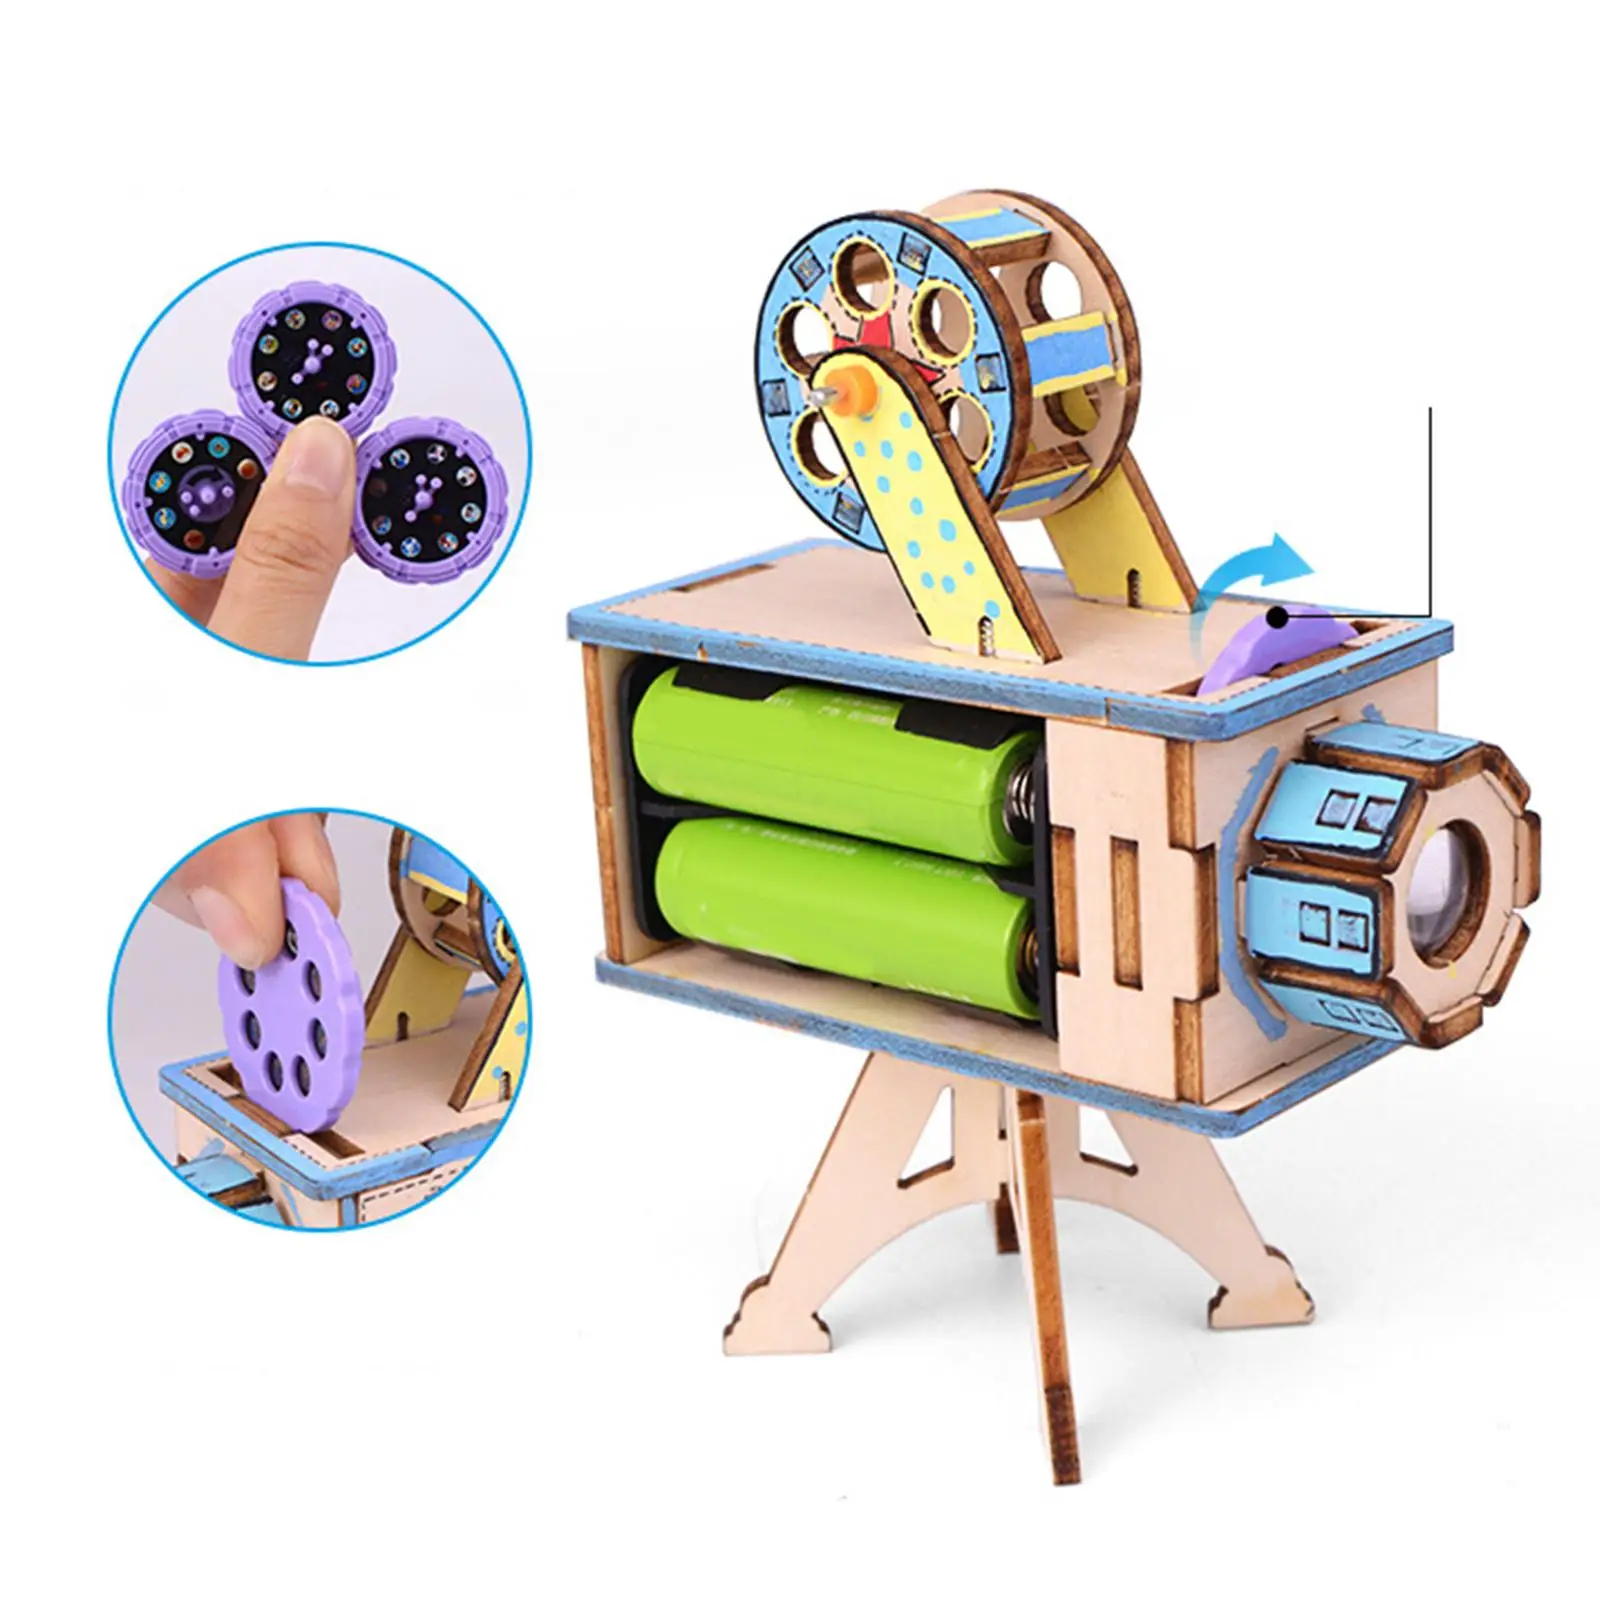 Projector Engineering Toys Educational Toys 3d Building Puzzles Electronic For Birthday Gifts